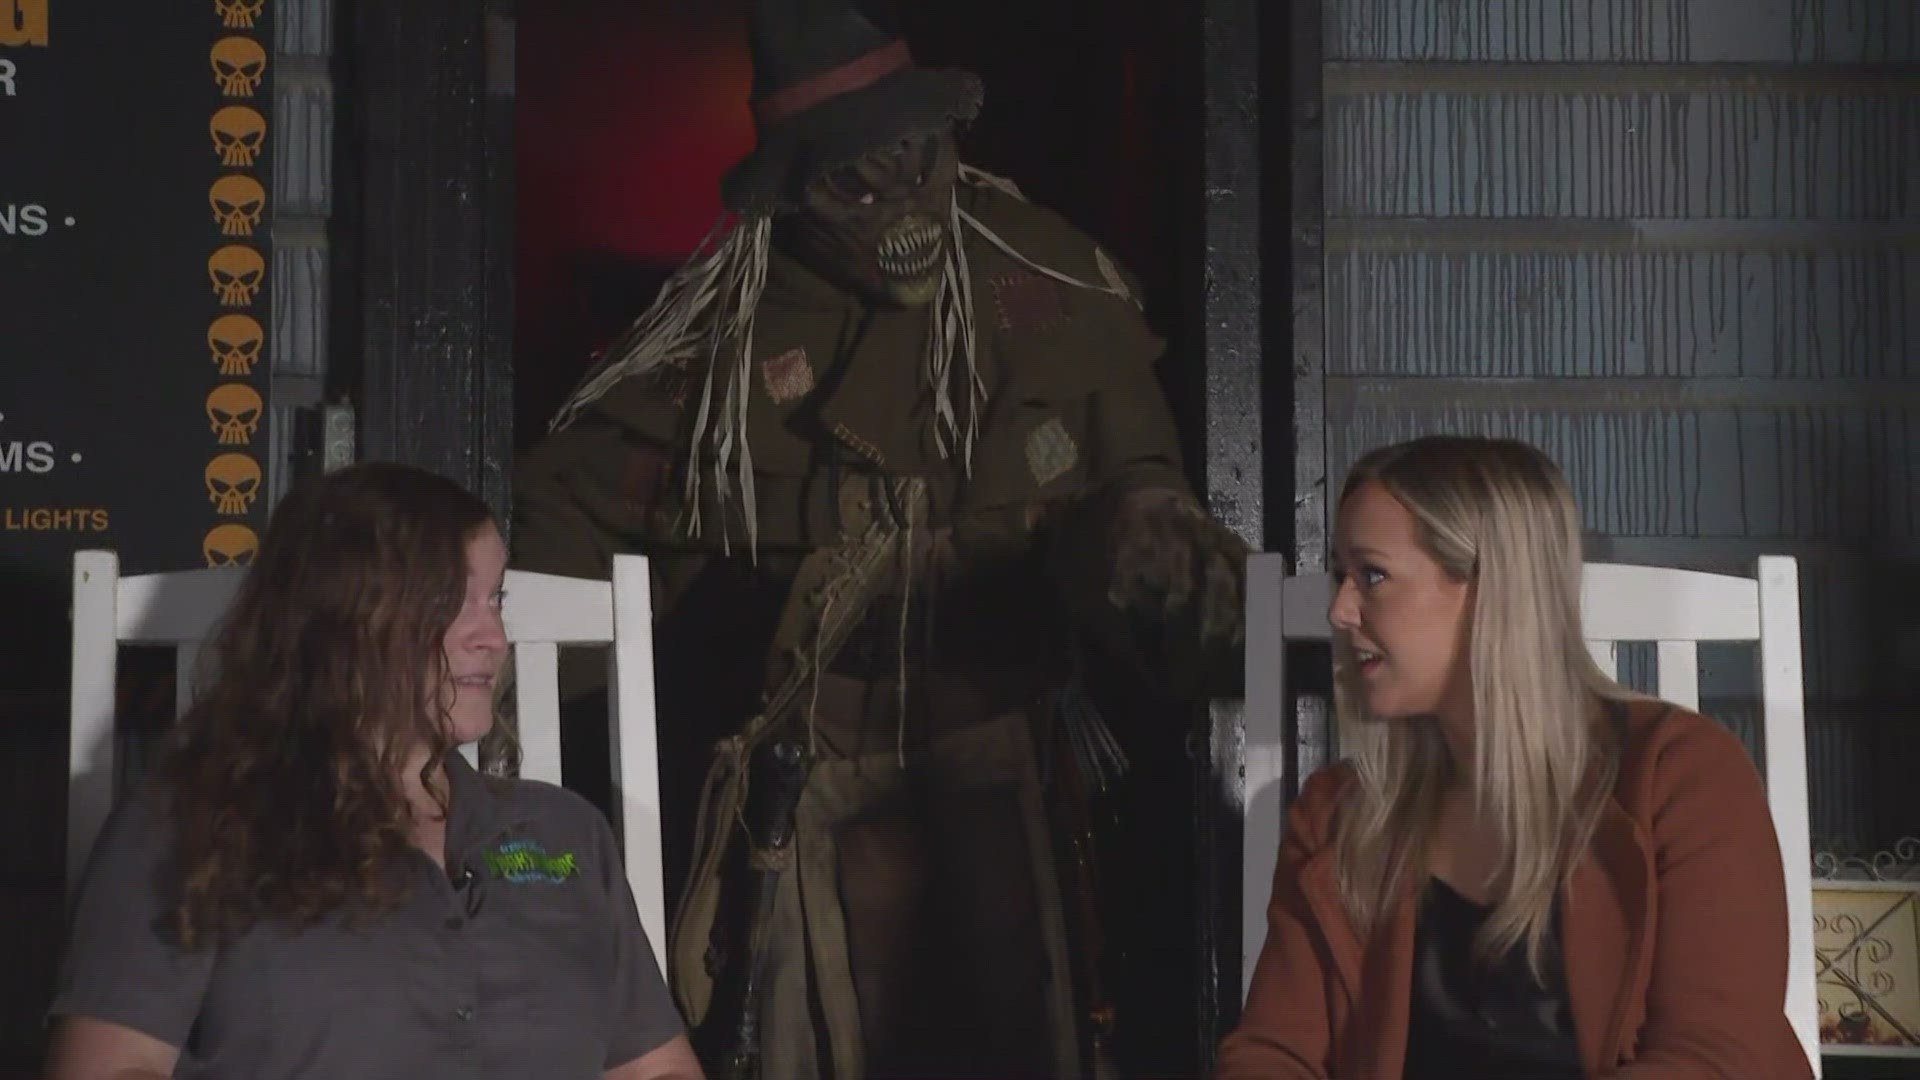 Hunter Funk talks to an art director at Kersey Valley Spooky Woods about the work that went into the sets and costumes.